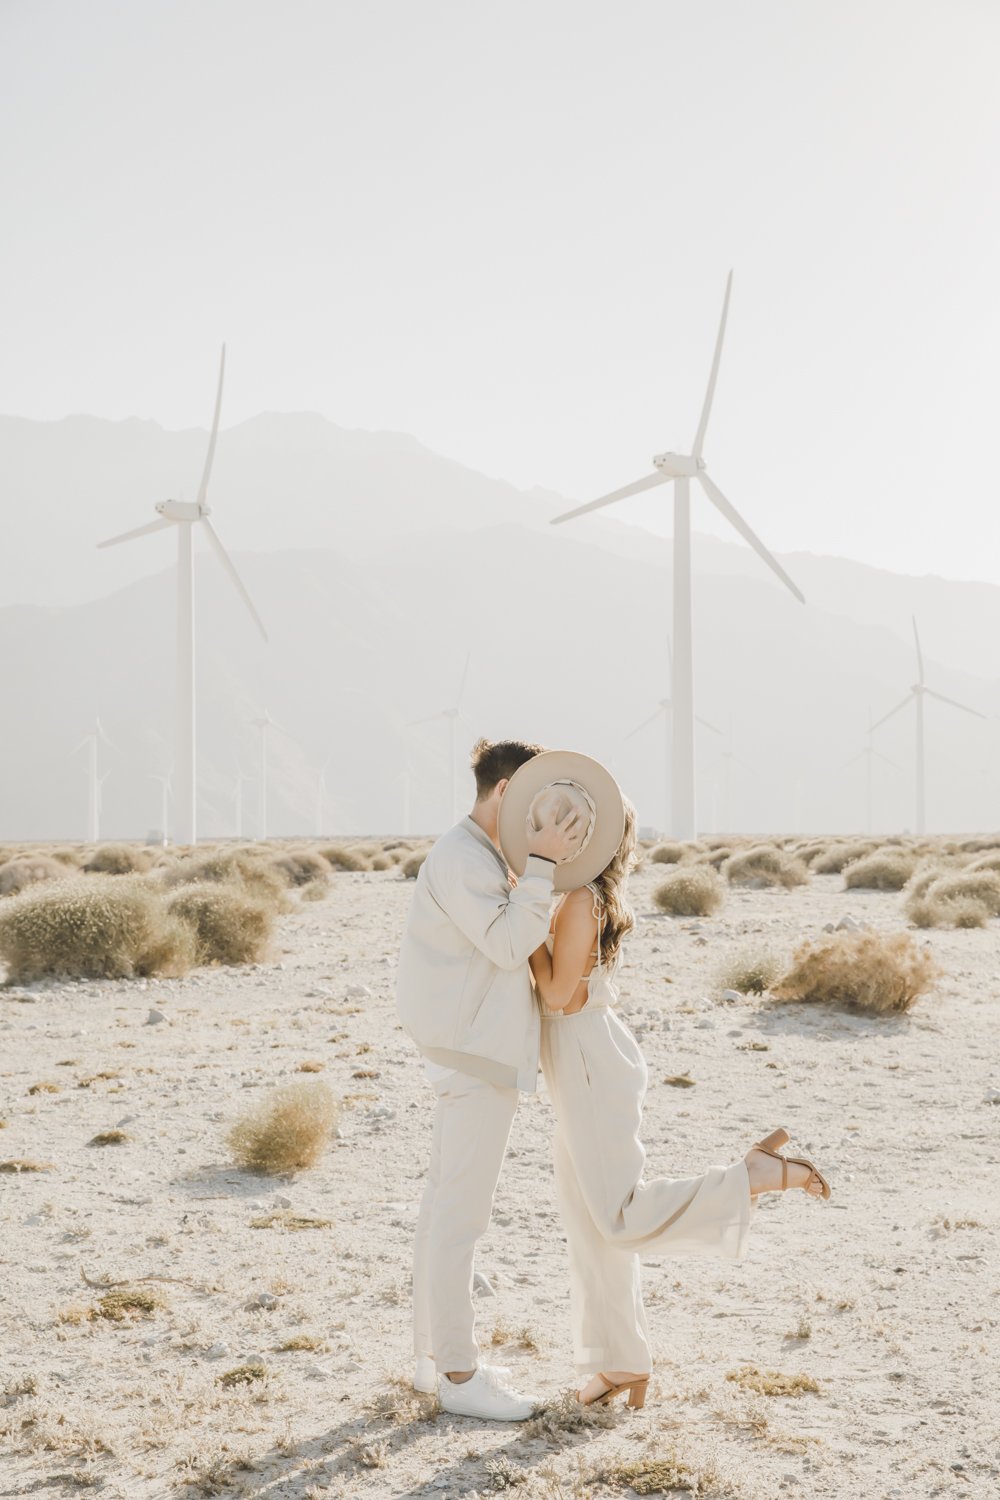 Best Palm Springs Engagement Photography Session Locations: Windmills &amp; Open Desert Fields